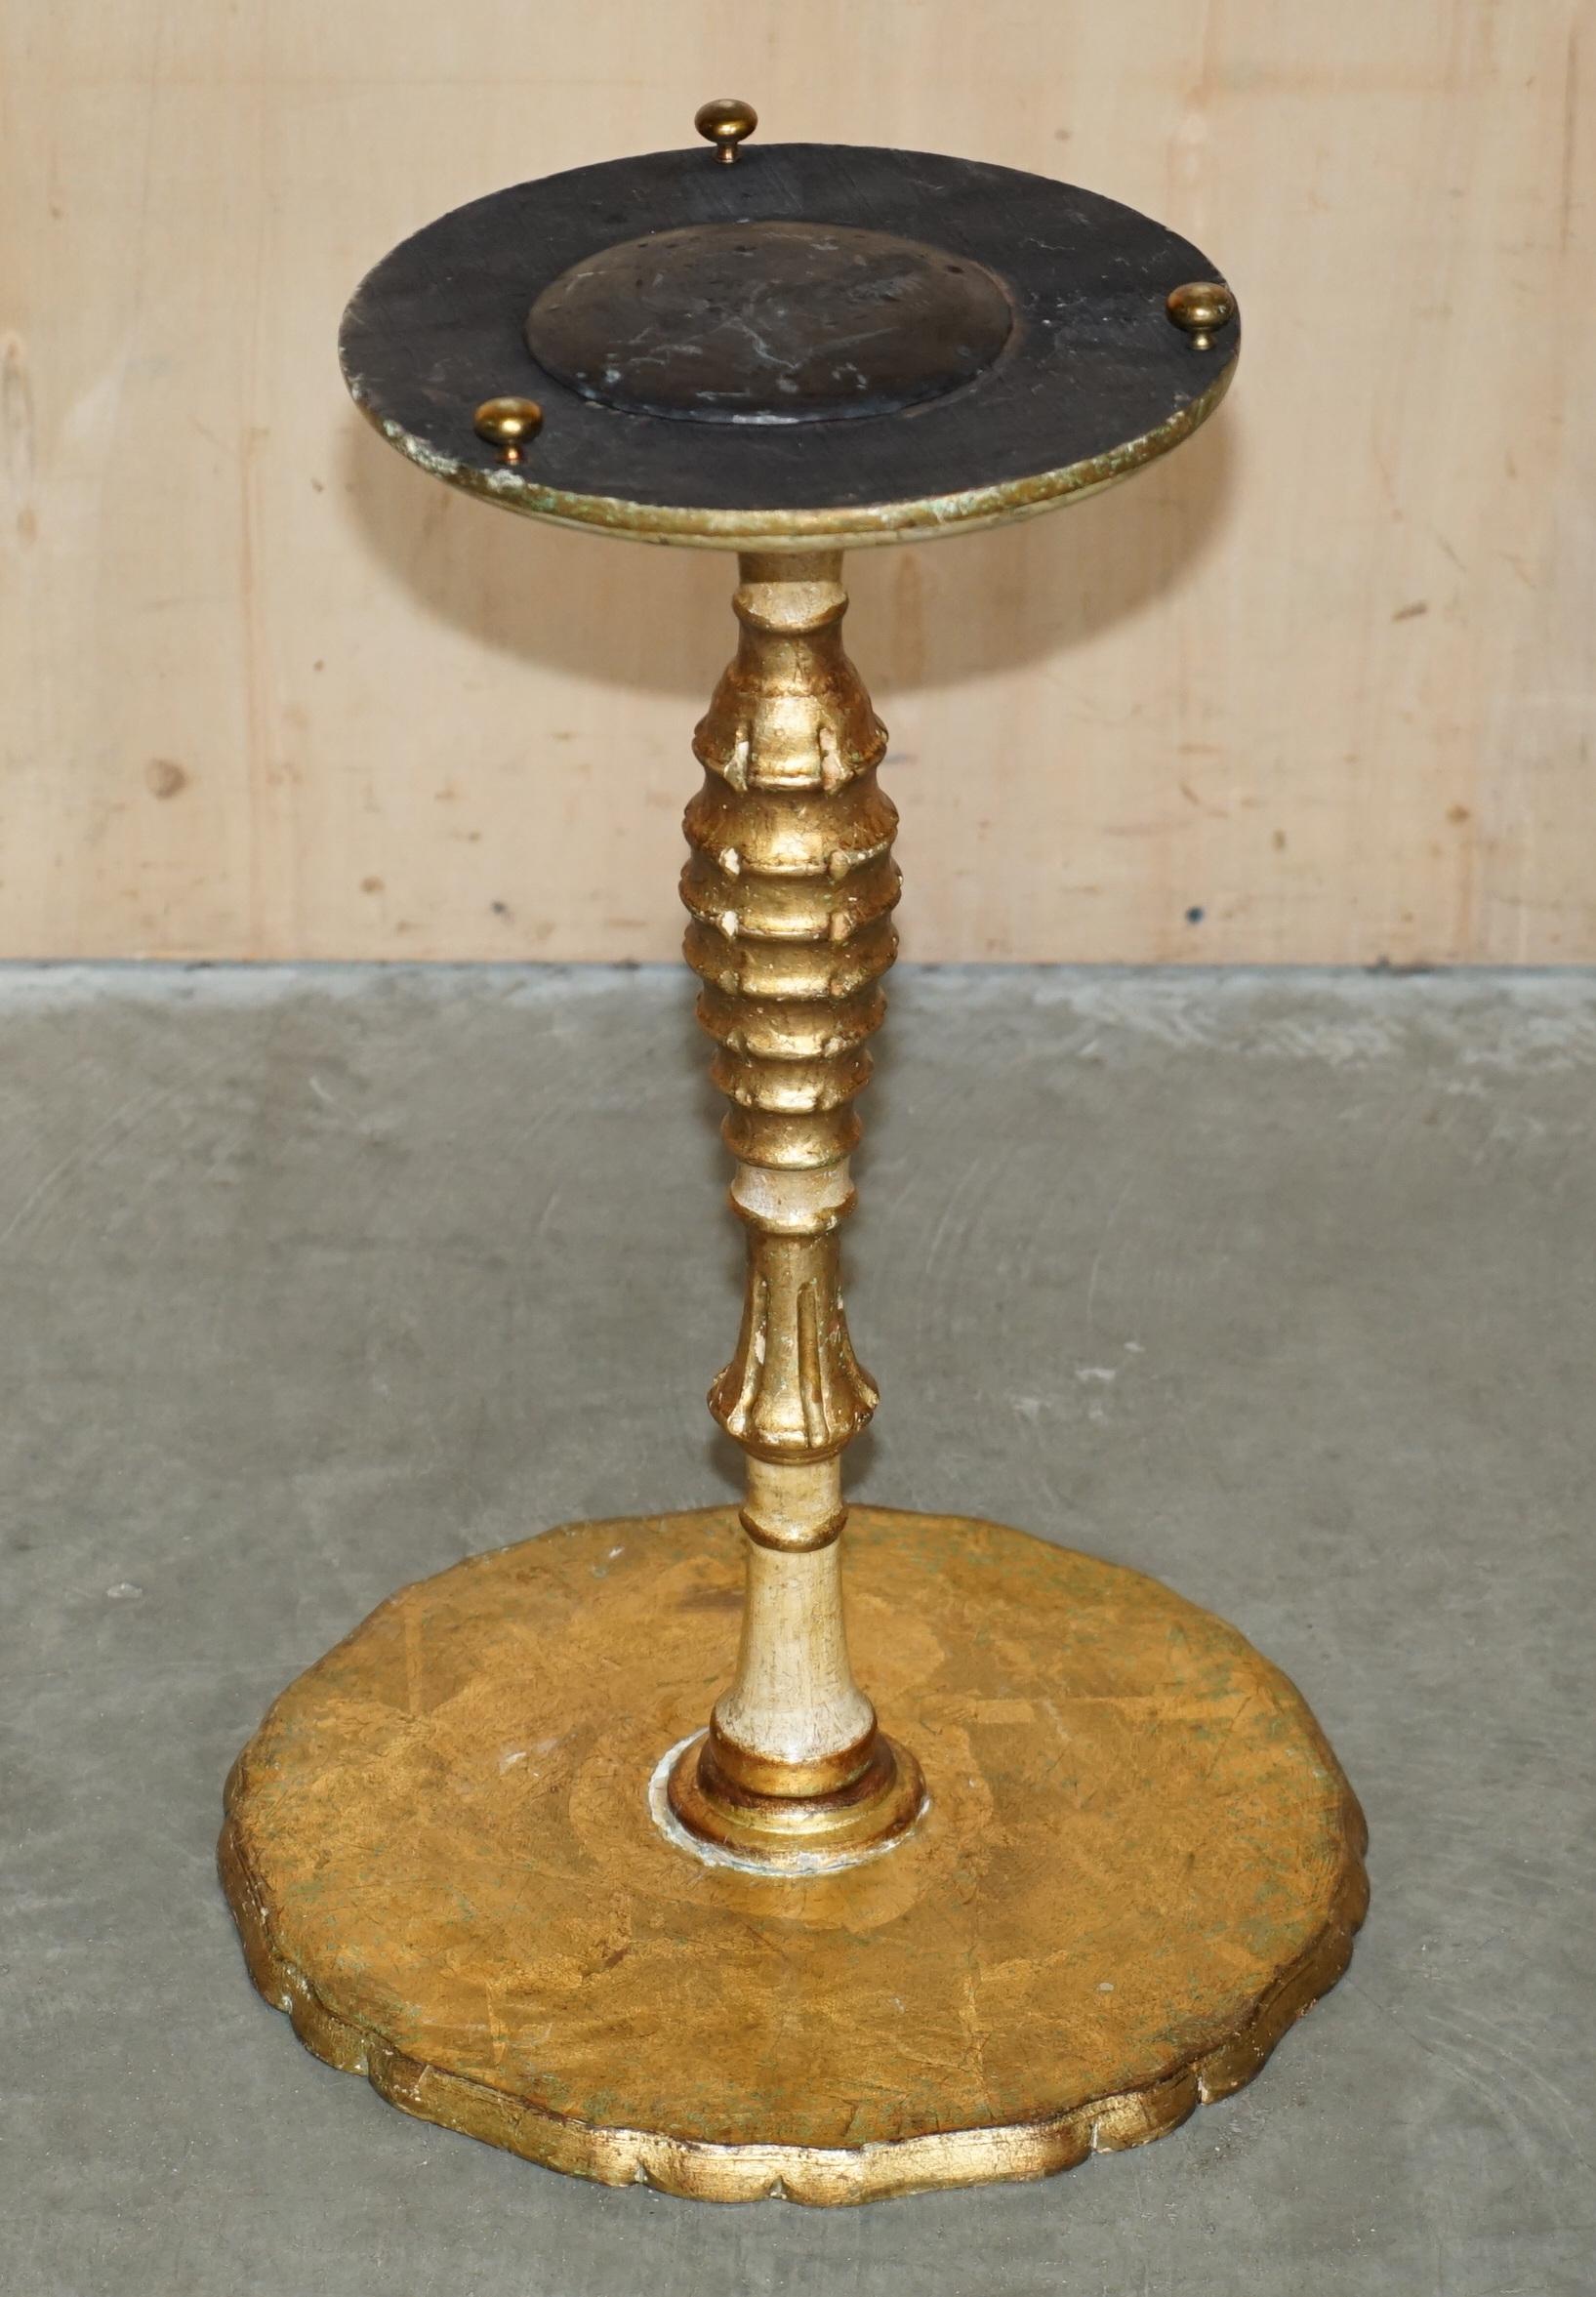 EXQUISITE AND HIGHLY DECORATIVE ITALIAN CIRCA 1900 POLYCHROME PAINTED SiDE TABLE For Sale 5